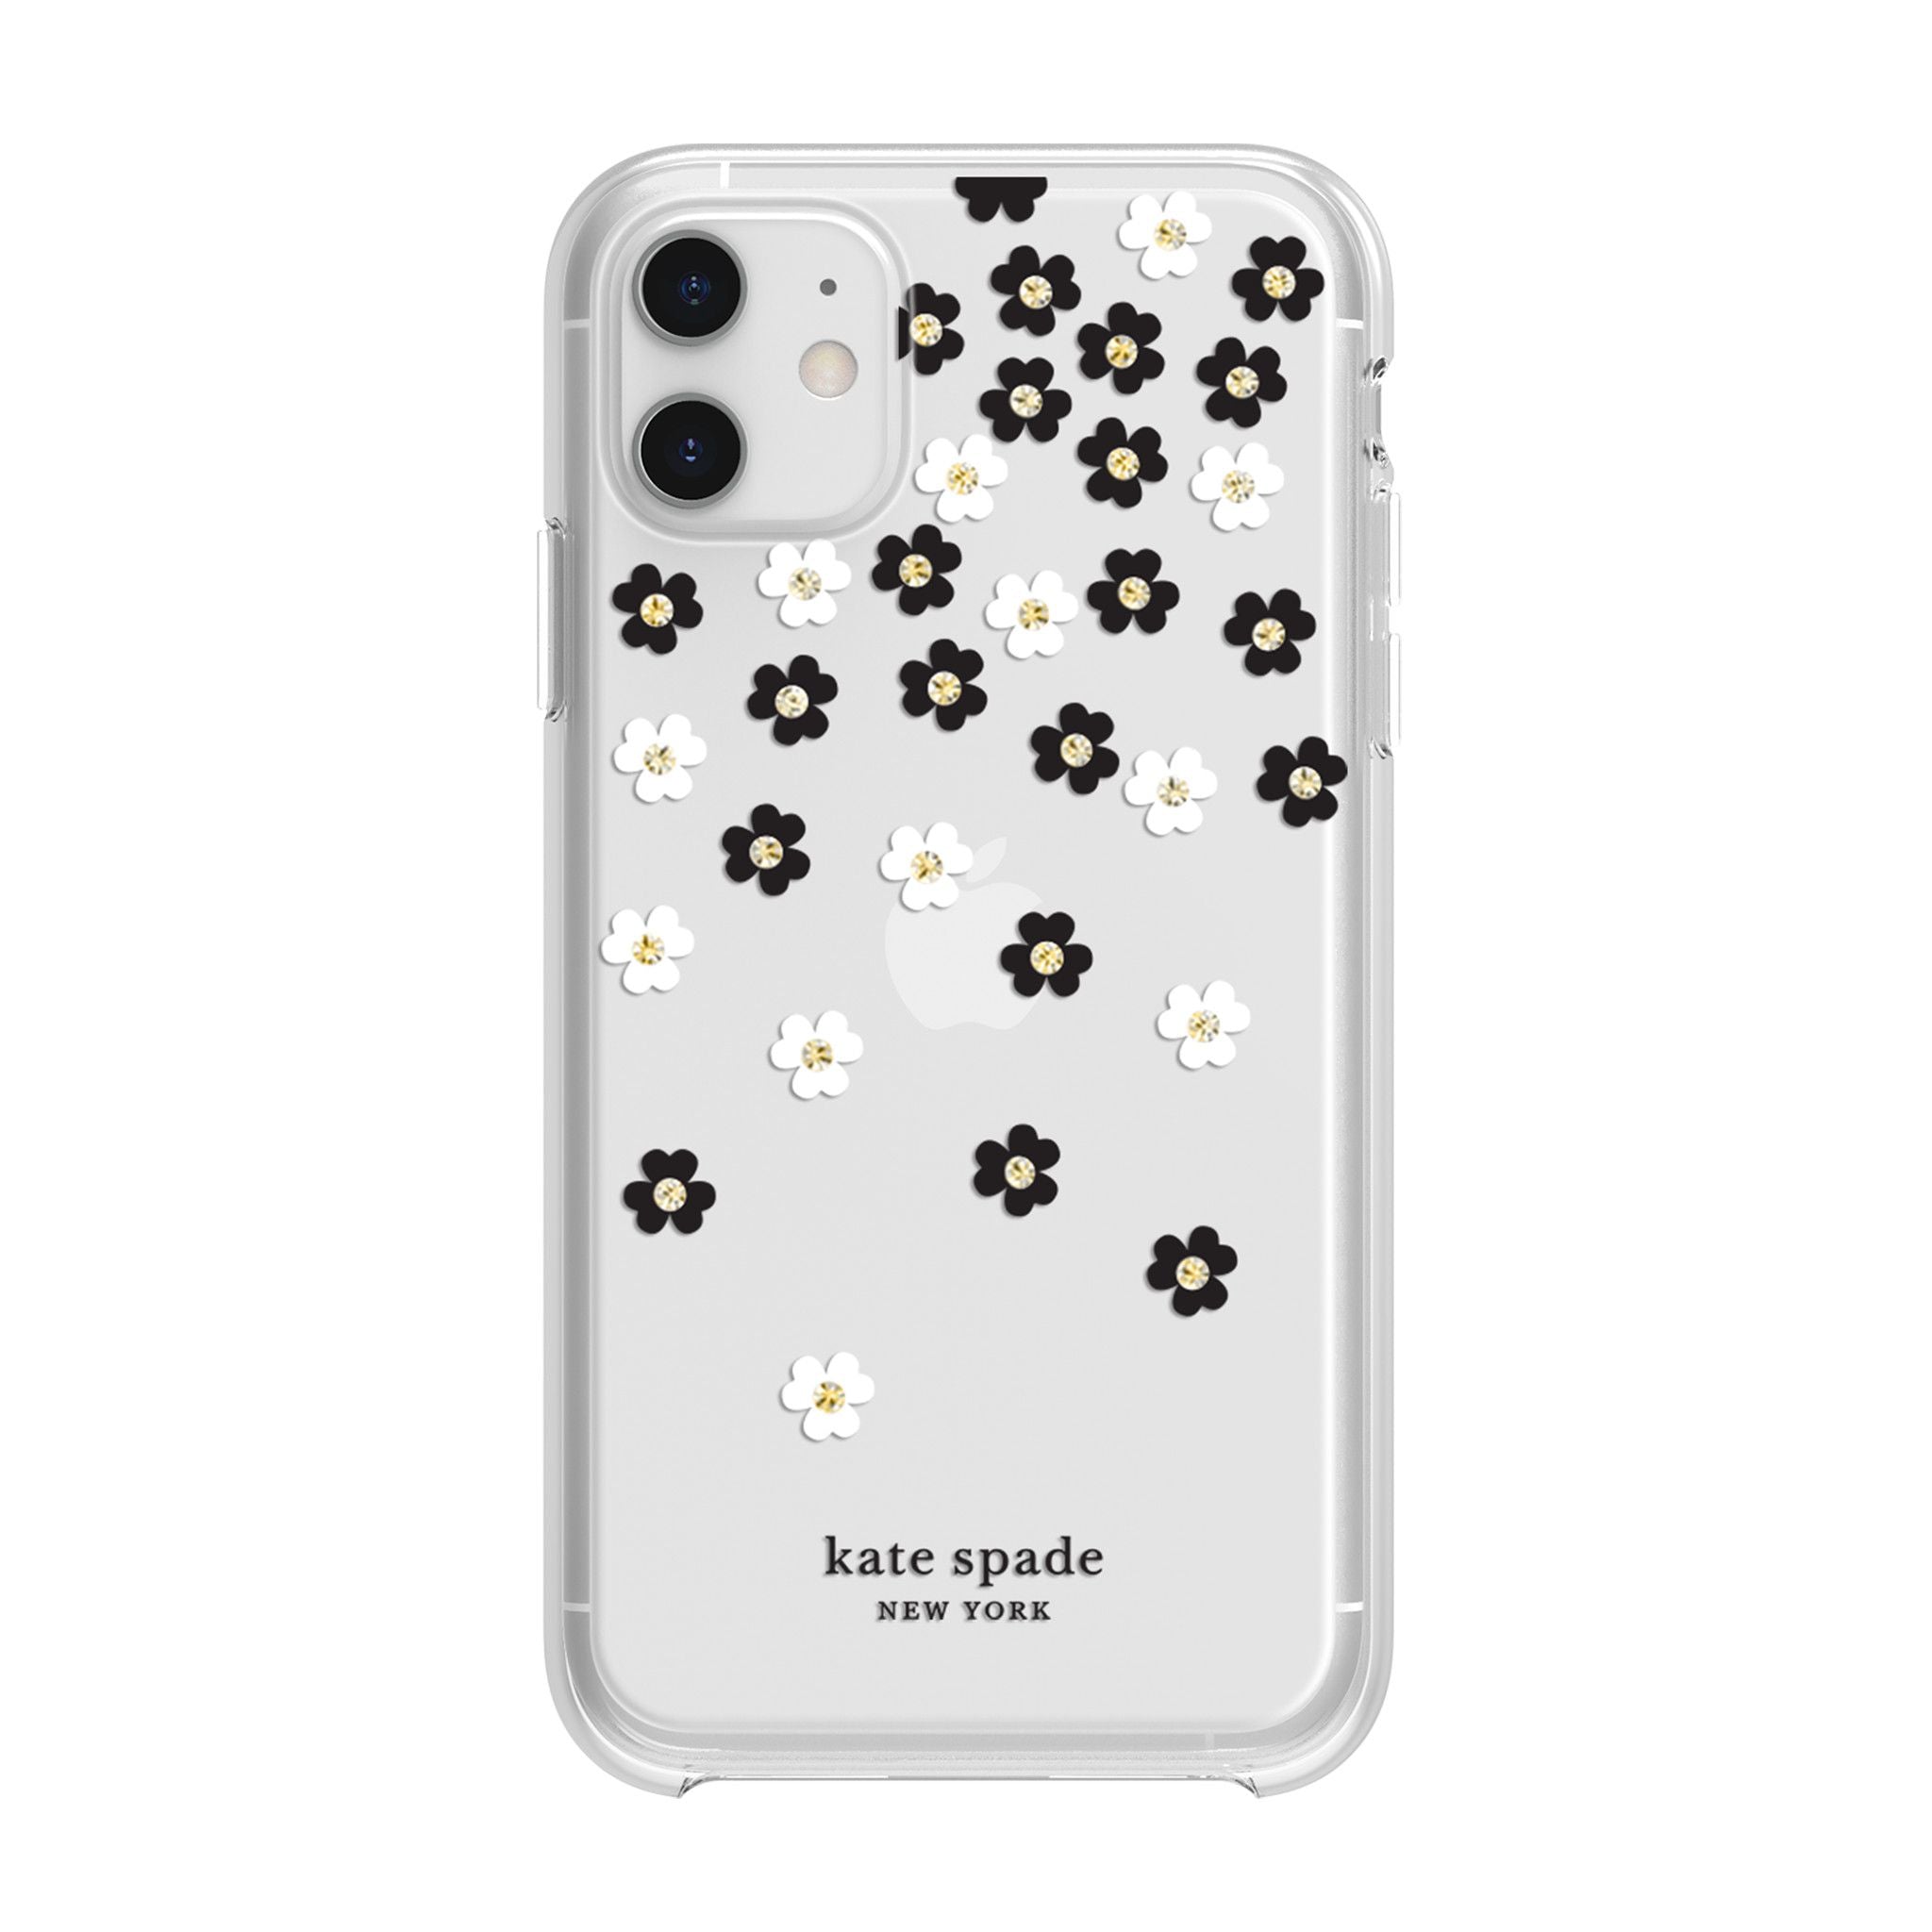 Kate Spade Protective Case for iPhone 11 Series